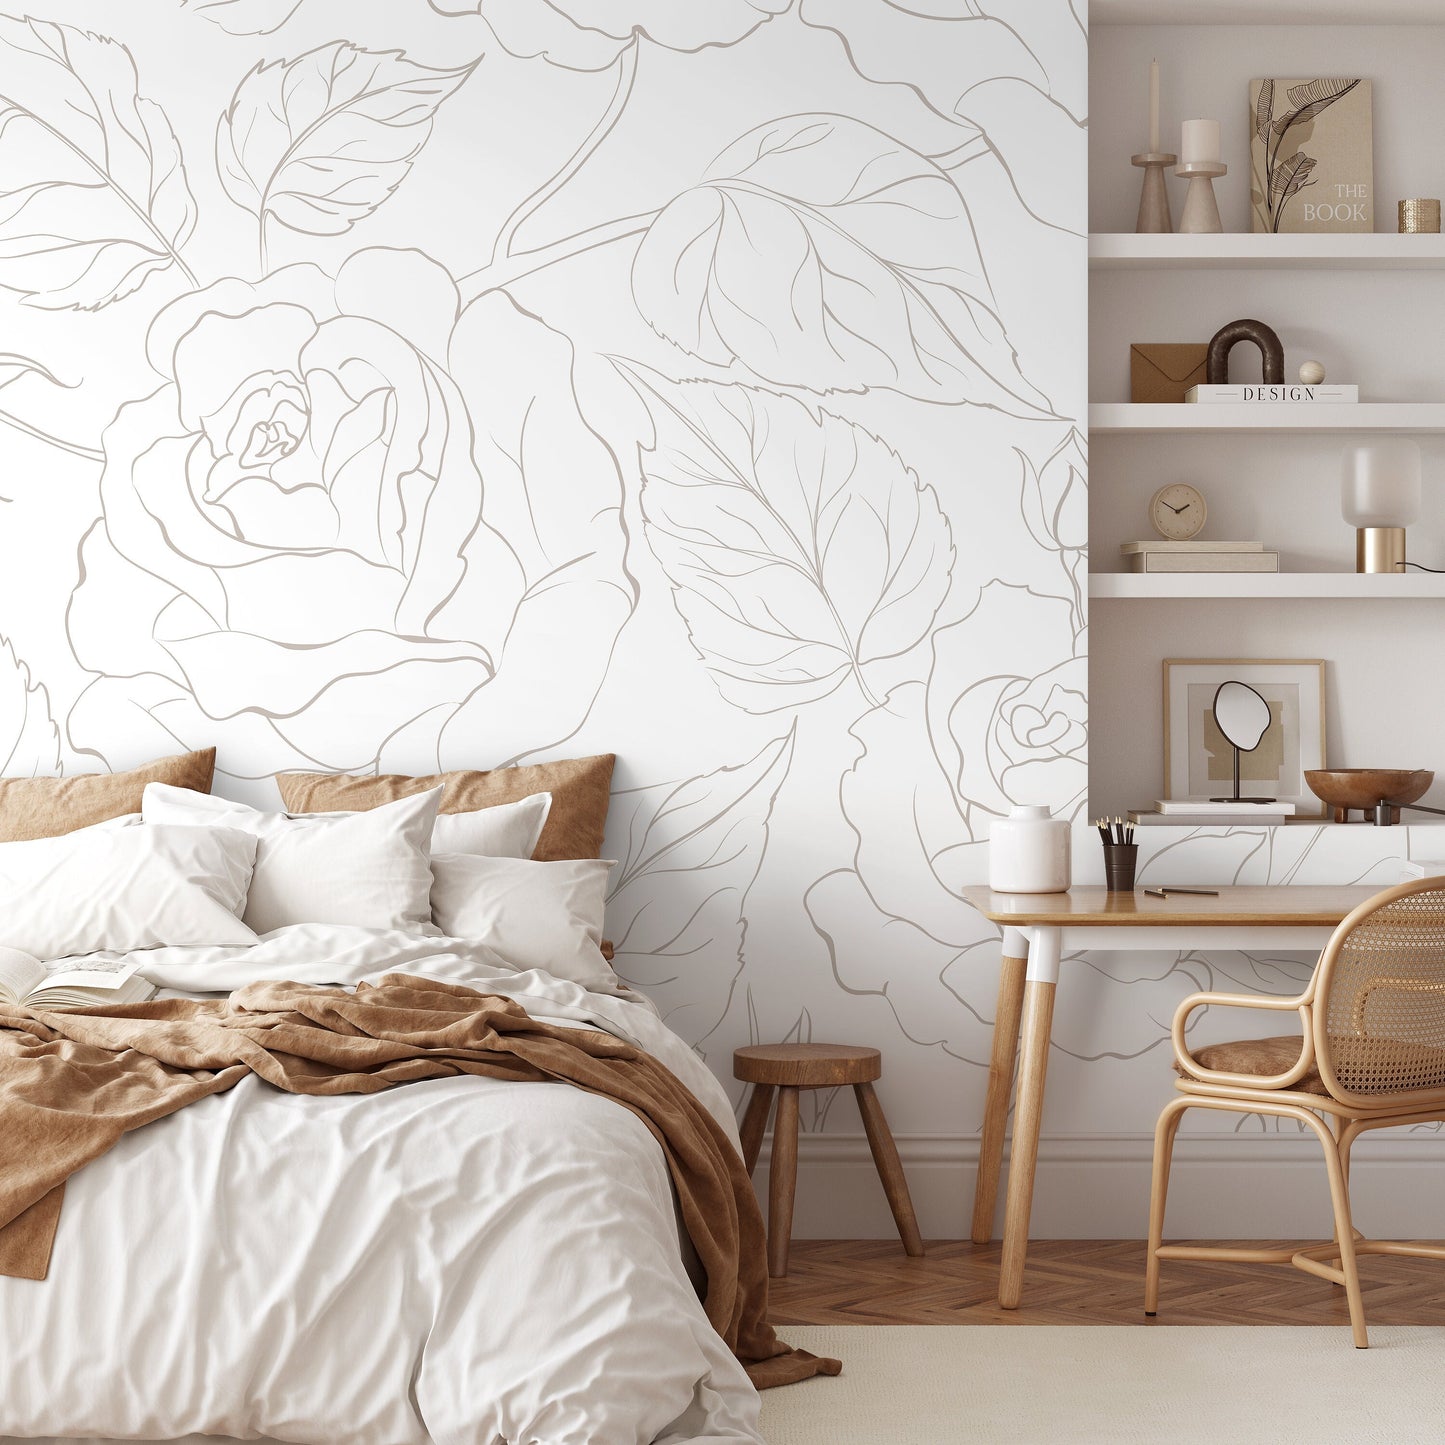 The Neutral Minimalist Peony Mural Mural Self Adhesive Large Scale Wallpaper Peony Floral Traditional Pre-pasted or Peel and Stick - ZADP